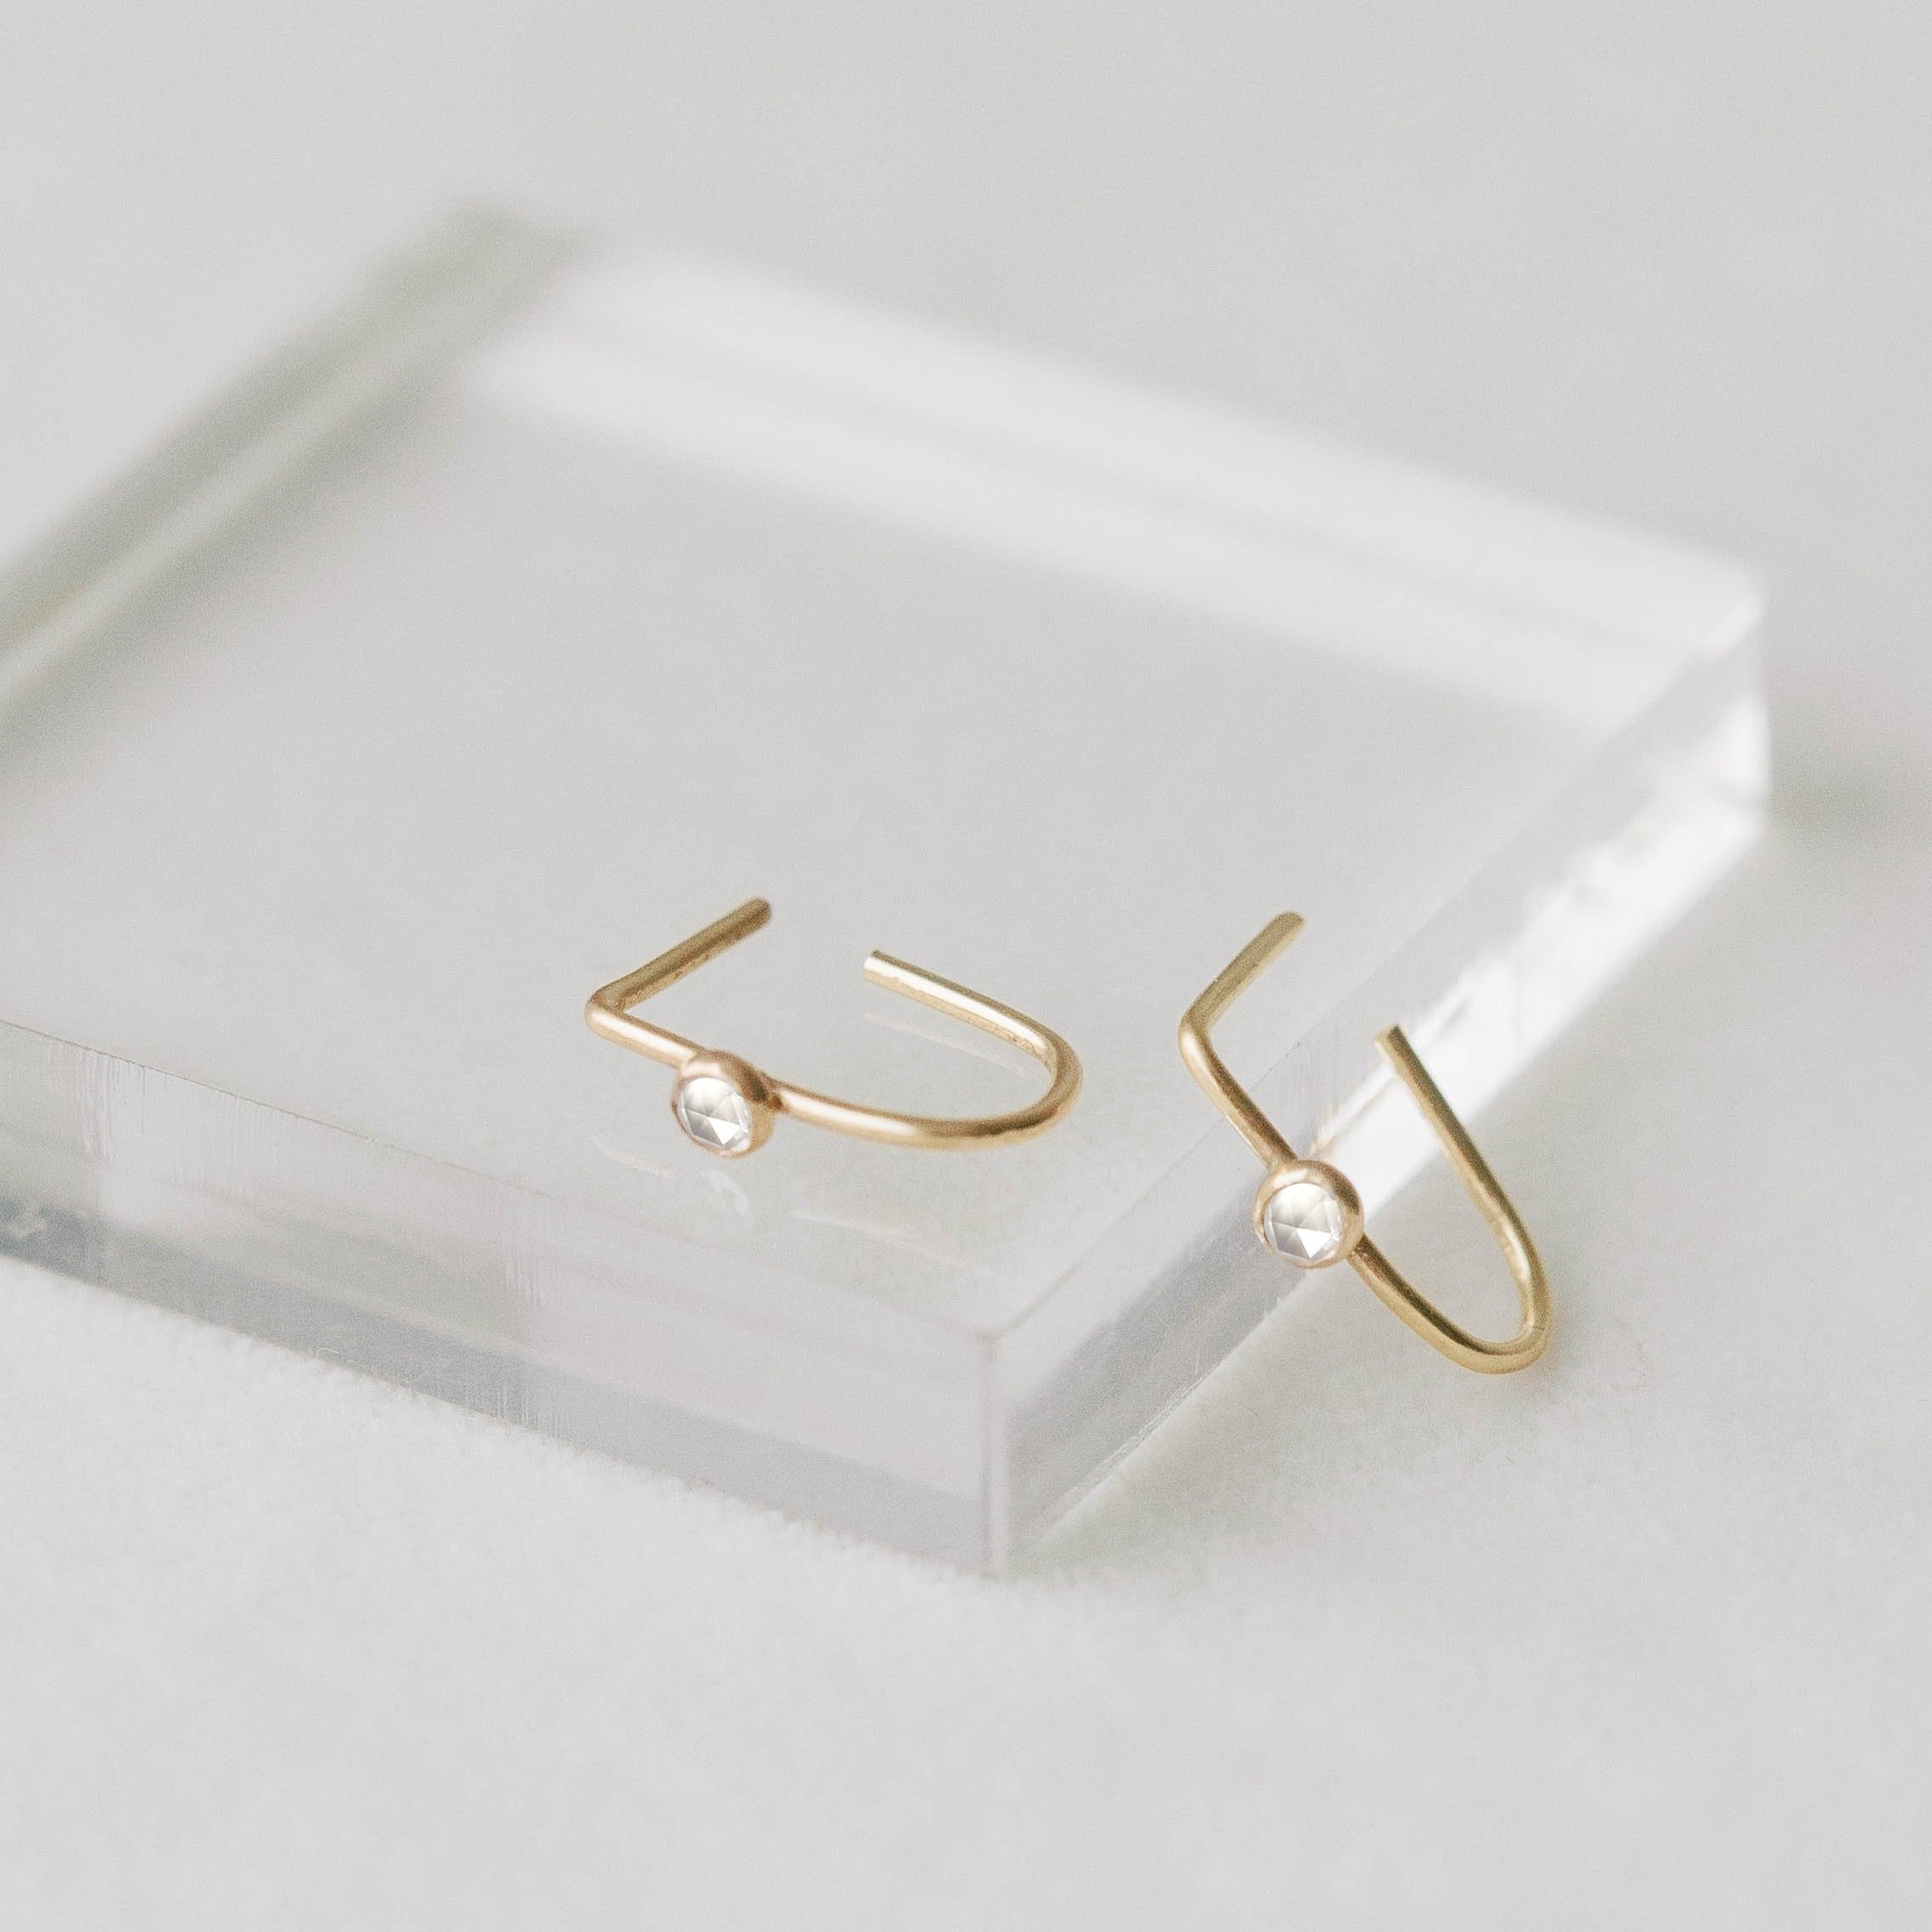 Small gold hoops made from recycled gold. Small white topaz rosecut stones.